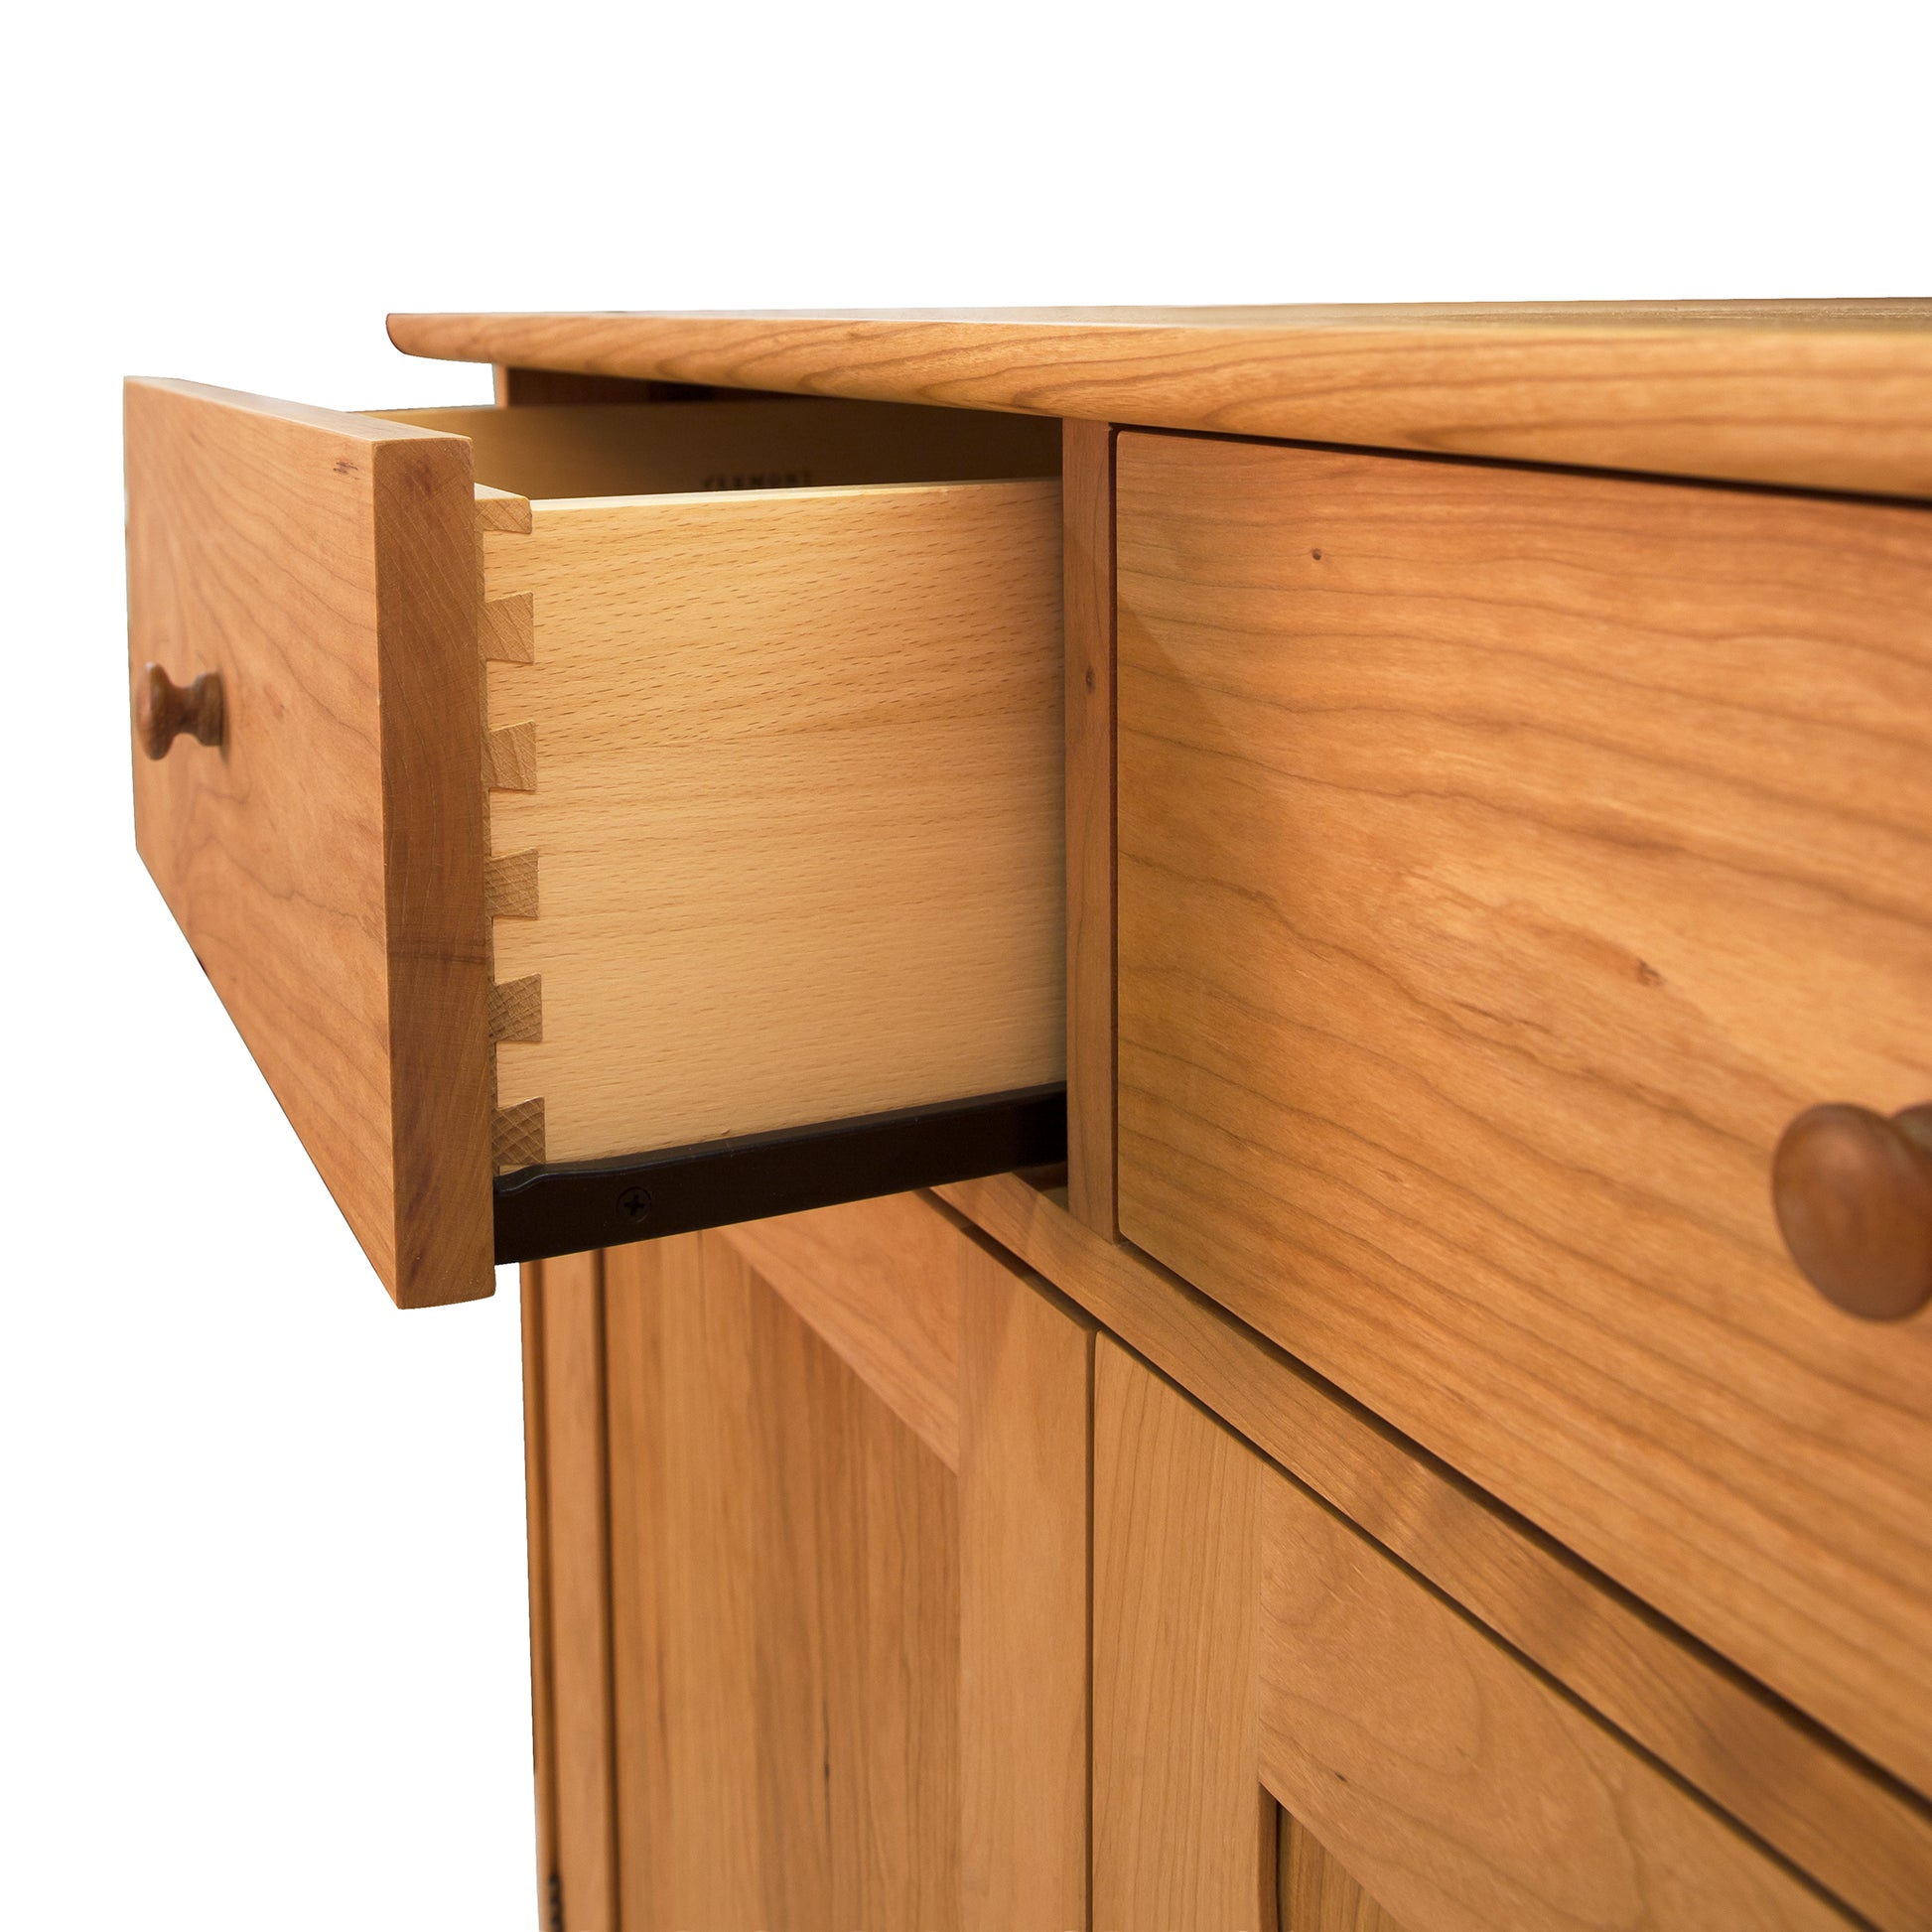 A Vermont Furniture Designs Heartwood Shaker Long Sideboard drawer partially opened, revealing dovetail joints, with the rest of the wooden desk and another drawer visible.